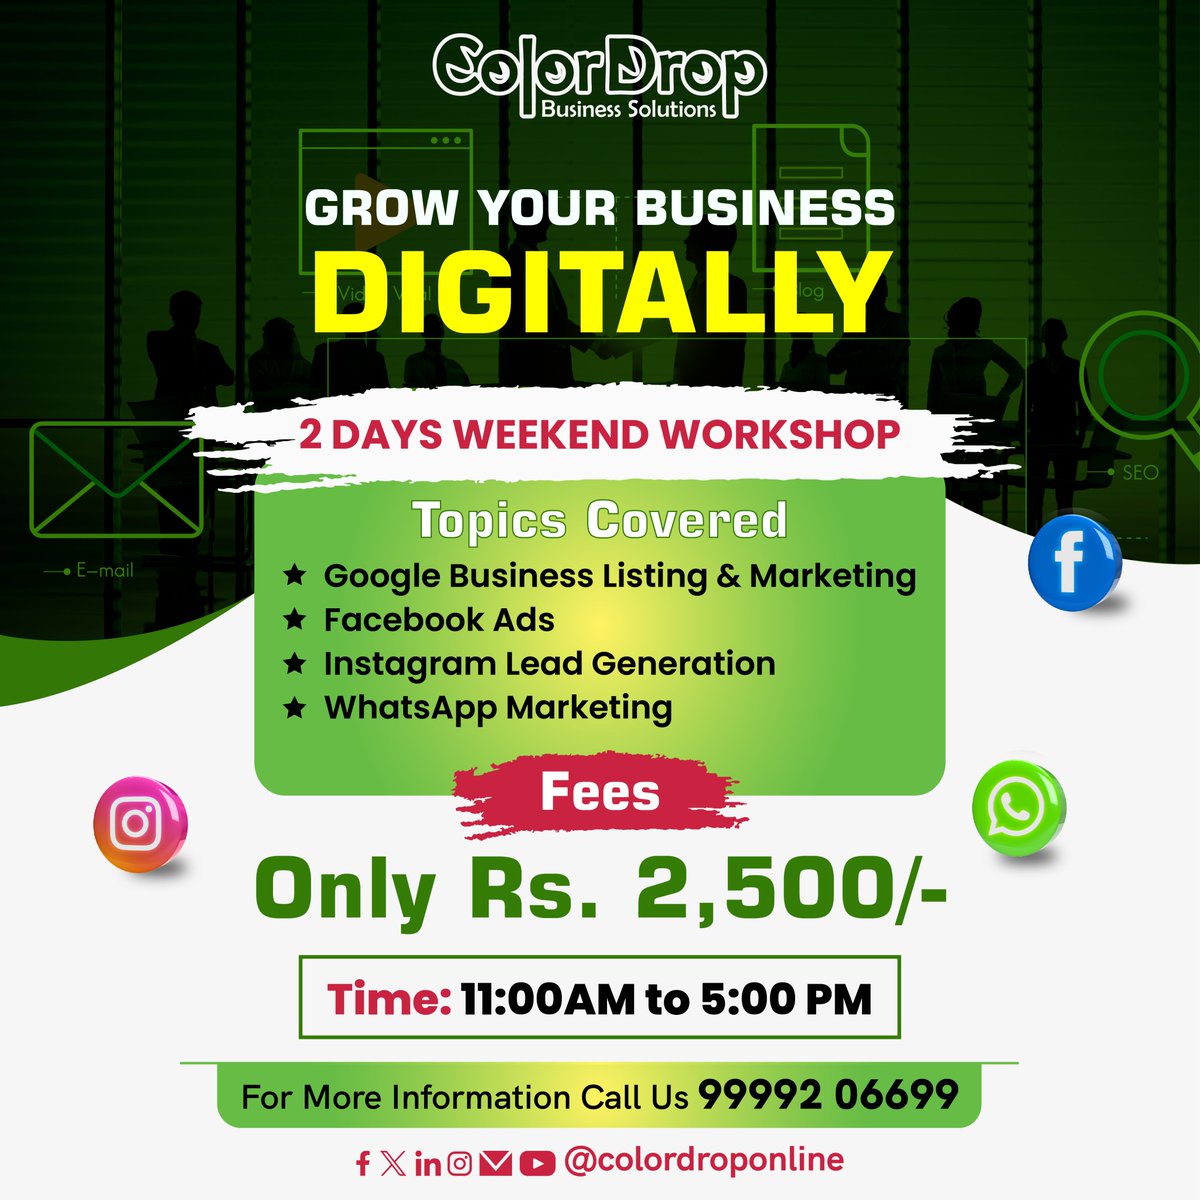 Join us for an exclusive workshop designed to supercharge your business in the digital world. Reserve your spot now! 🚀💻
Call us at: 99992 06699

#DigitalWorkshop #BusinessGrowth #DigitalMarketing #socialmediamarketing #colordropbusinesssolutions #onlinemarketing #SEO